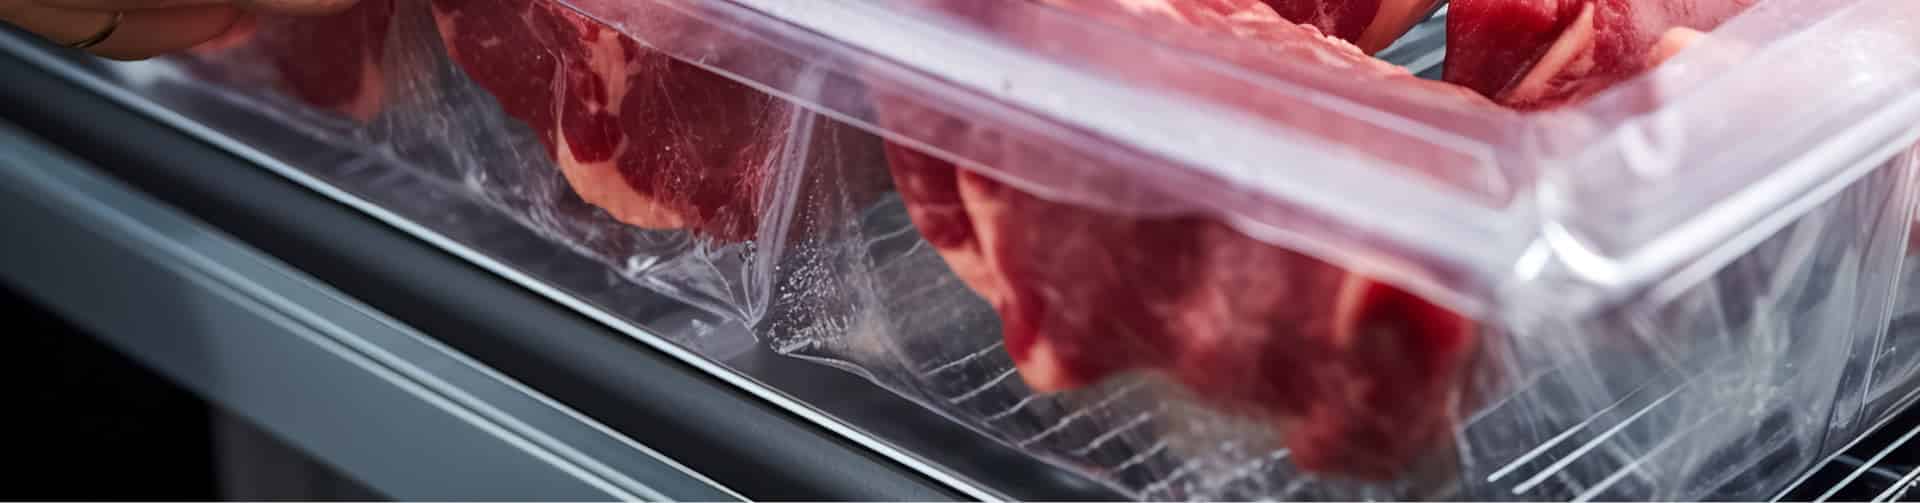 Expert article_cross contamination_meat